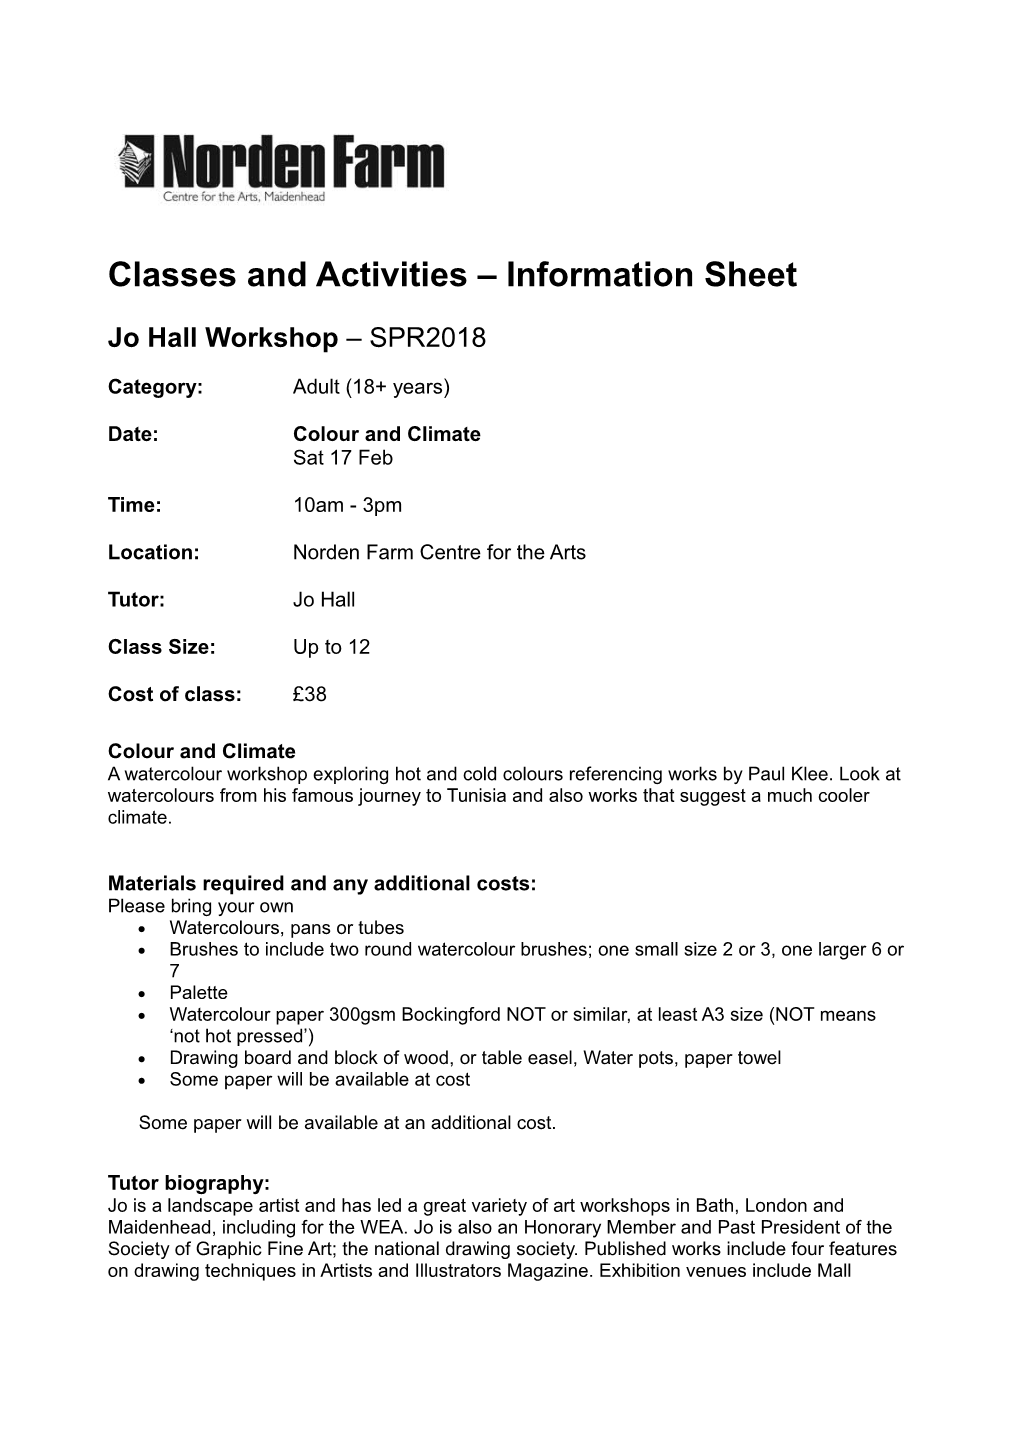 Classes and Activities Information Sheet